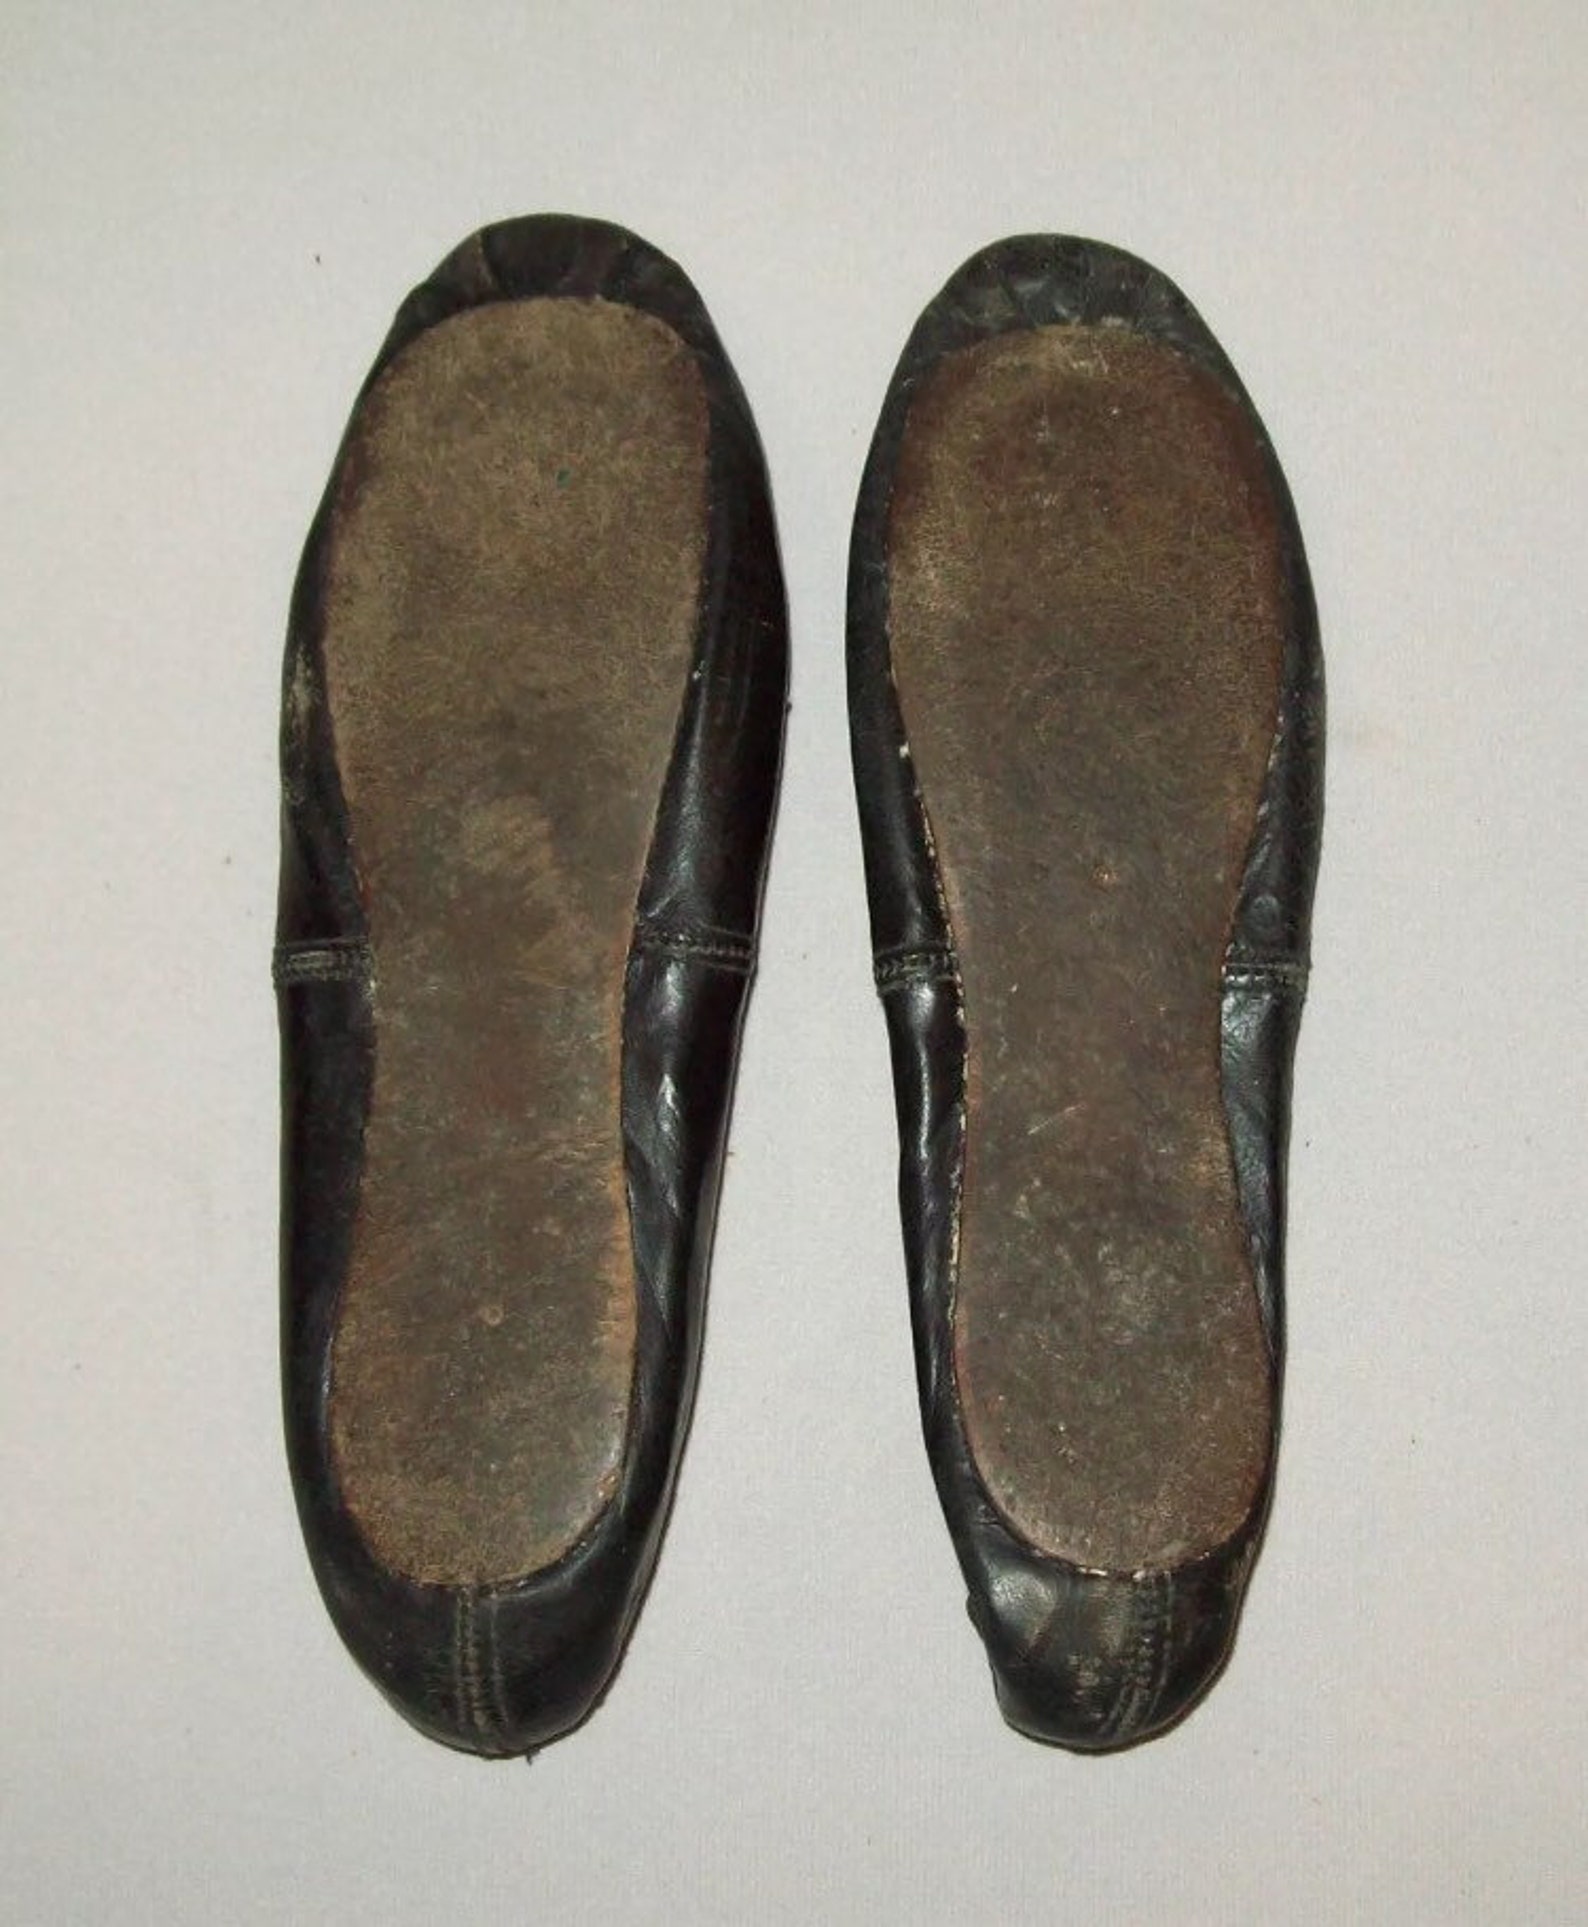 nice 19th c pair of mid 19th century leather ballet slippers or shoes